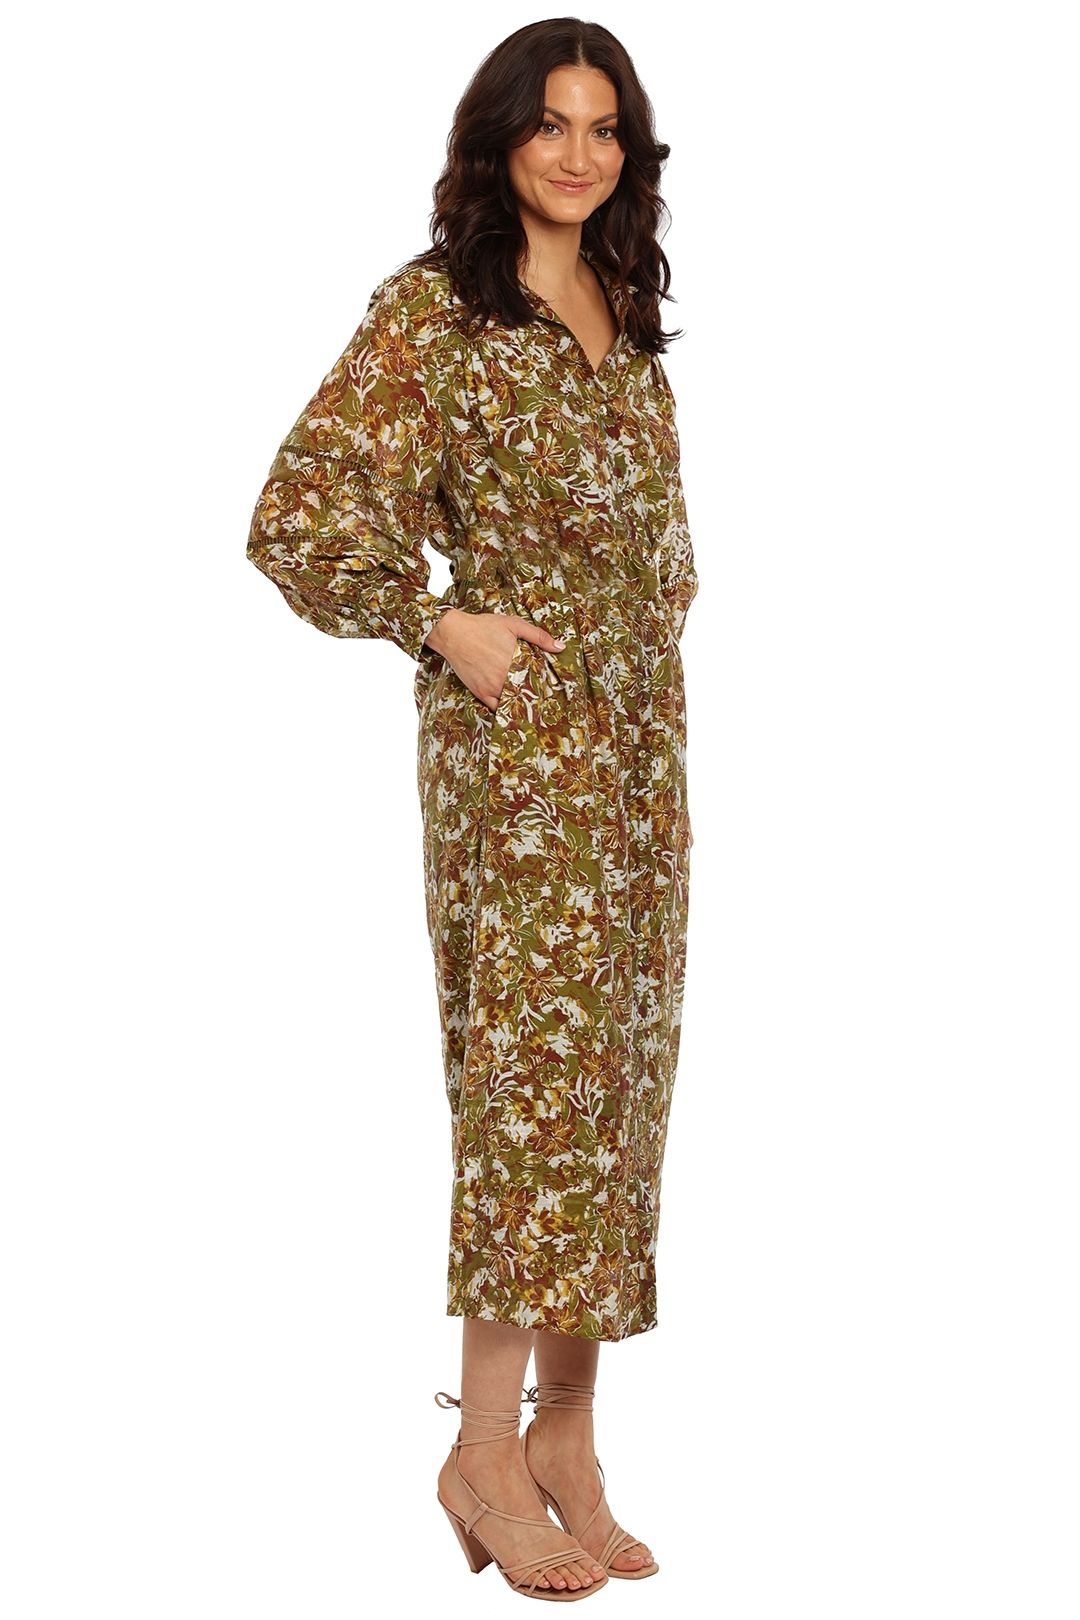 Ministry of Style Floral In Disguise Maxi Dress Long Sleeves